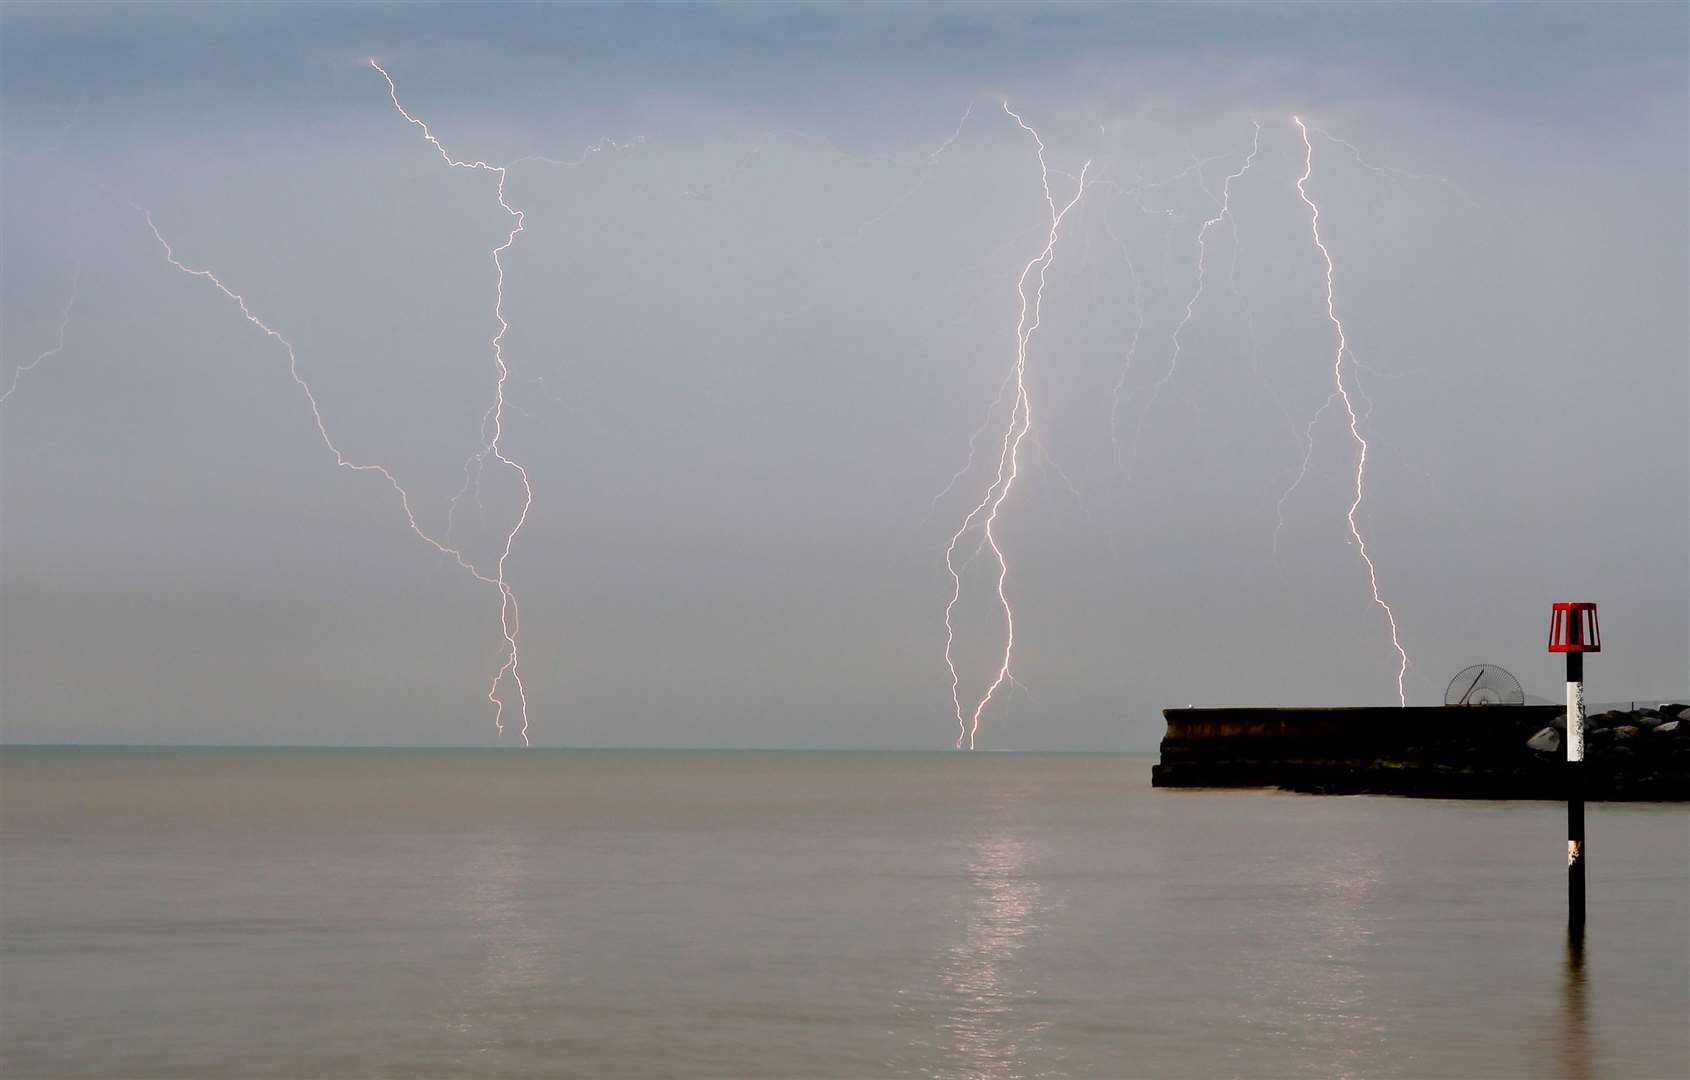 Thunderstorms are predicted. Picture: Shine Pix Ltd / Shaun Fellows